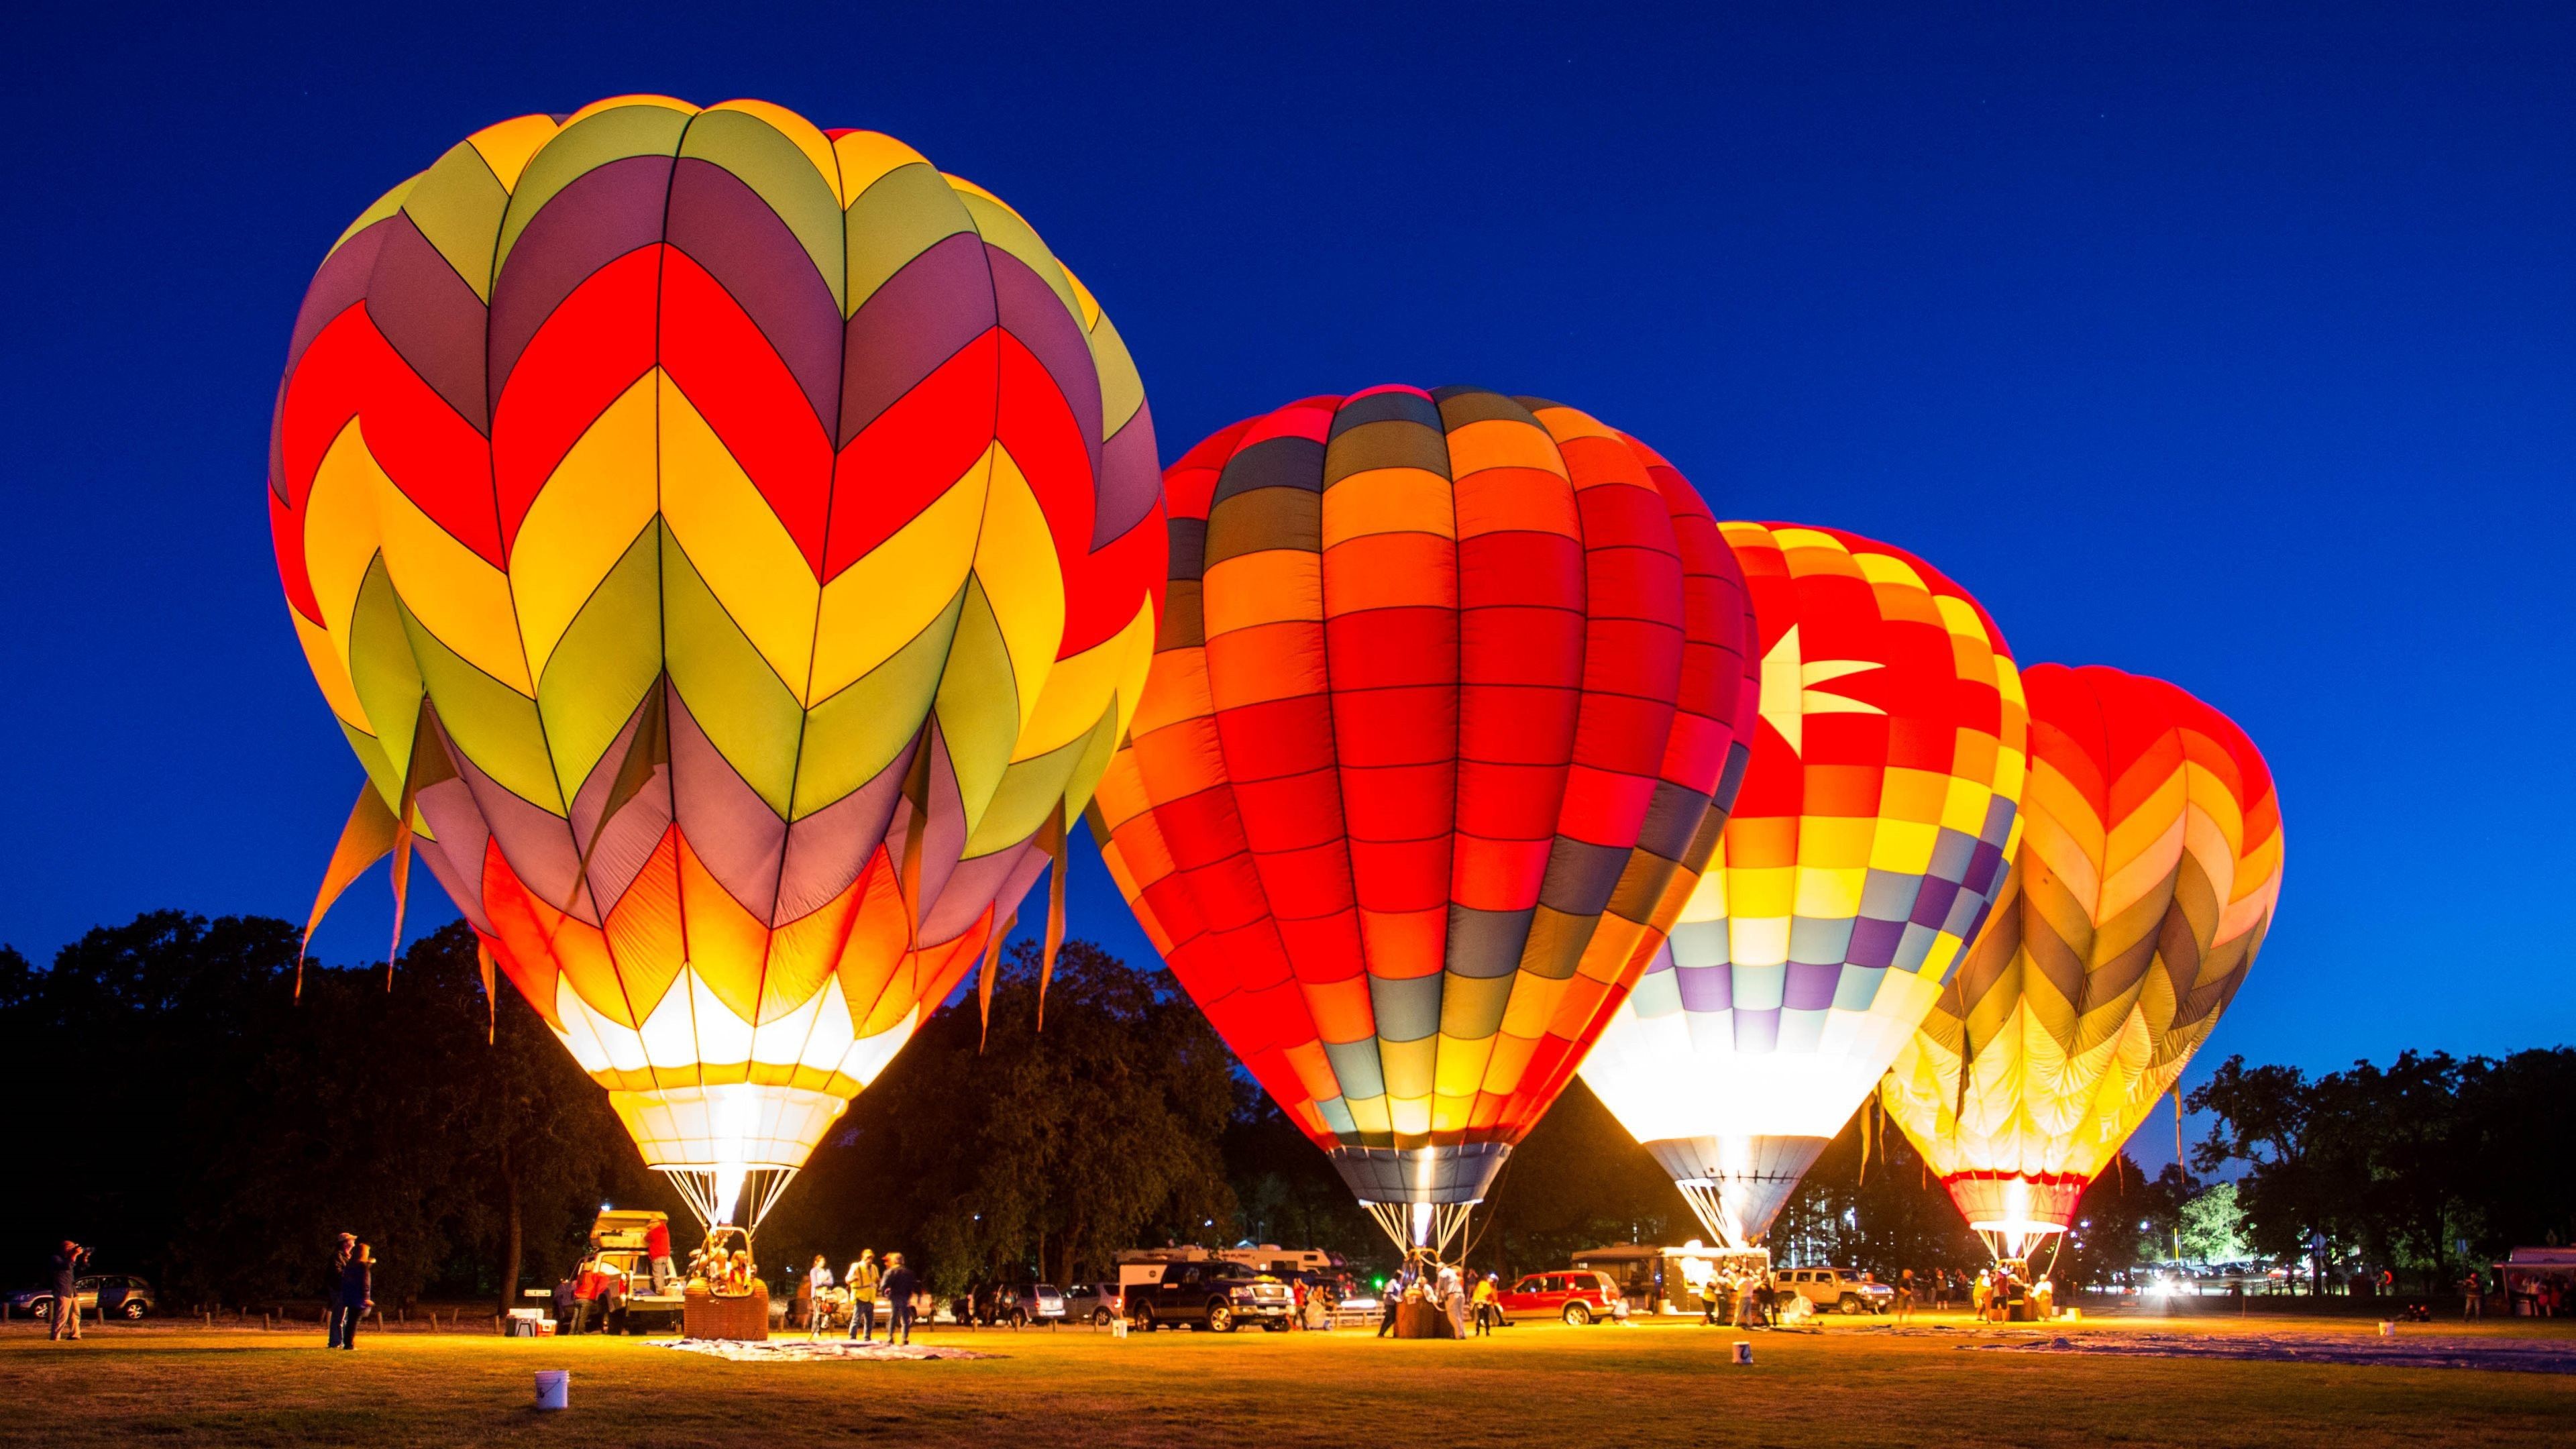 3840x2160 beautiful colorful hot air balloons with fire full hd wallpaper